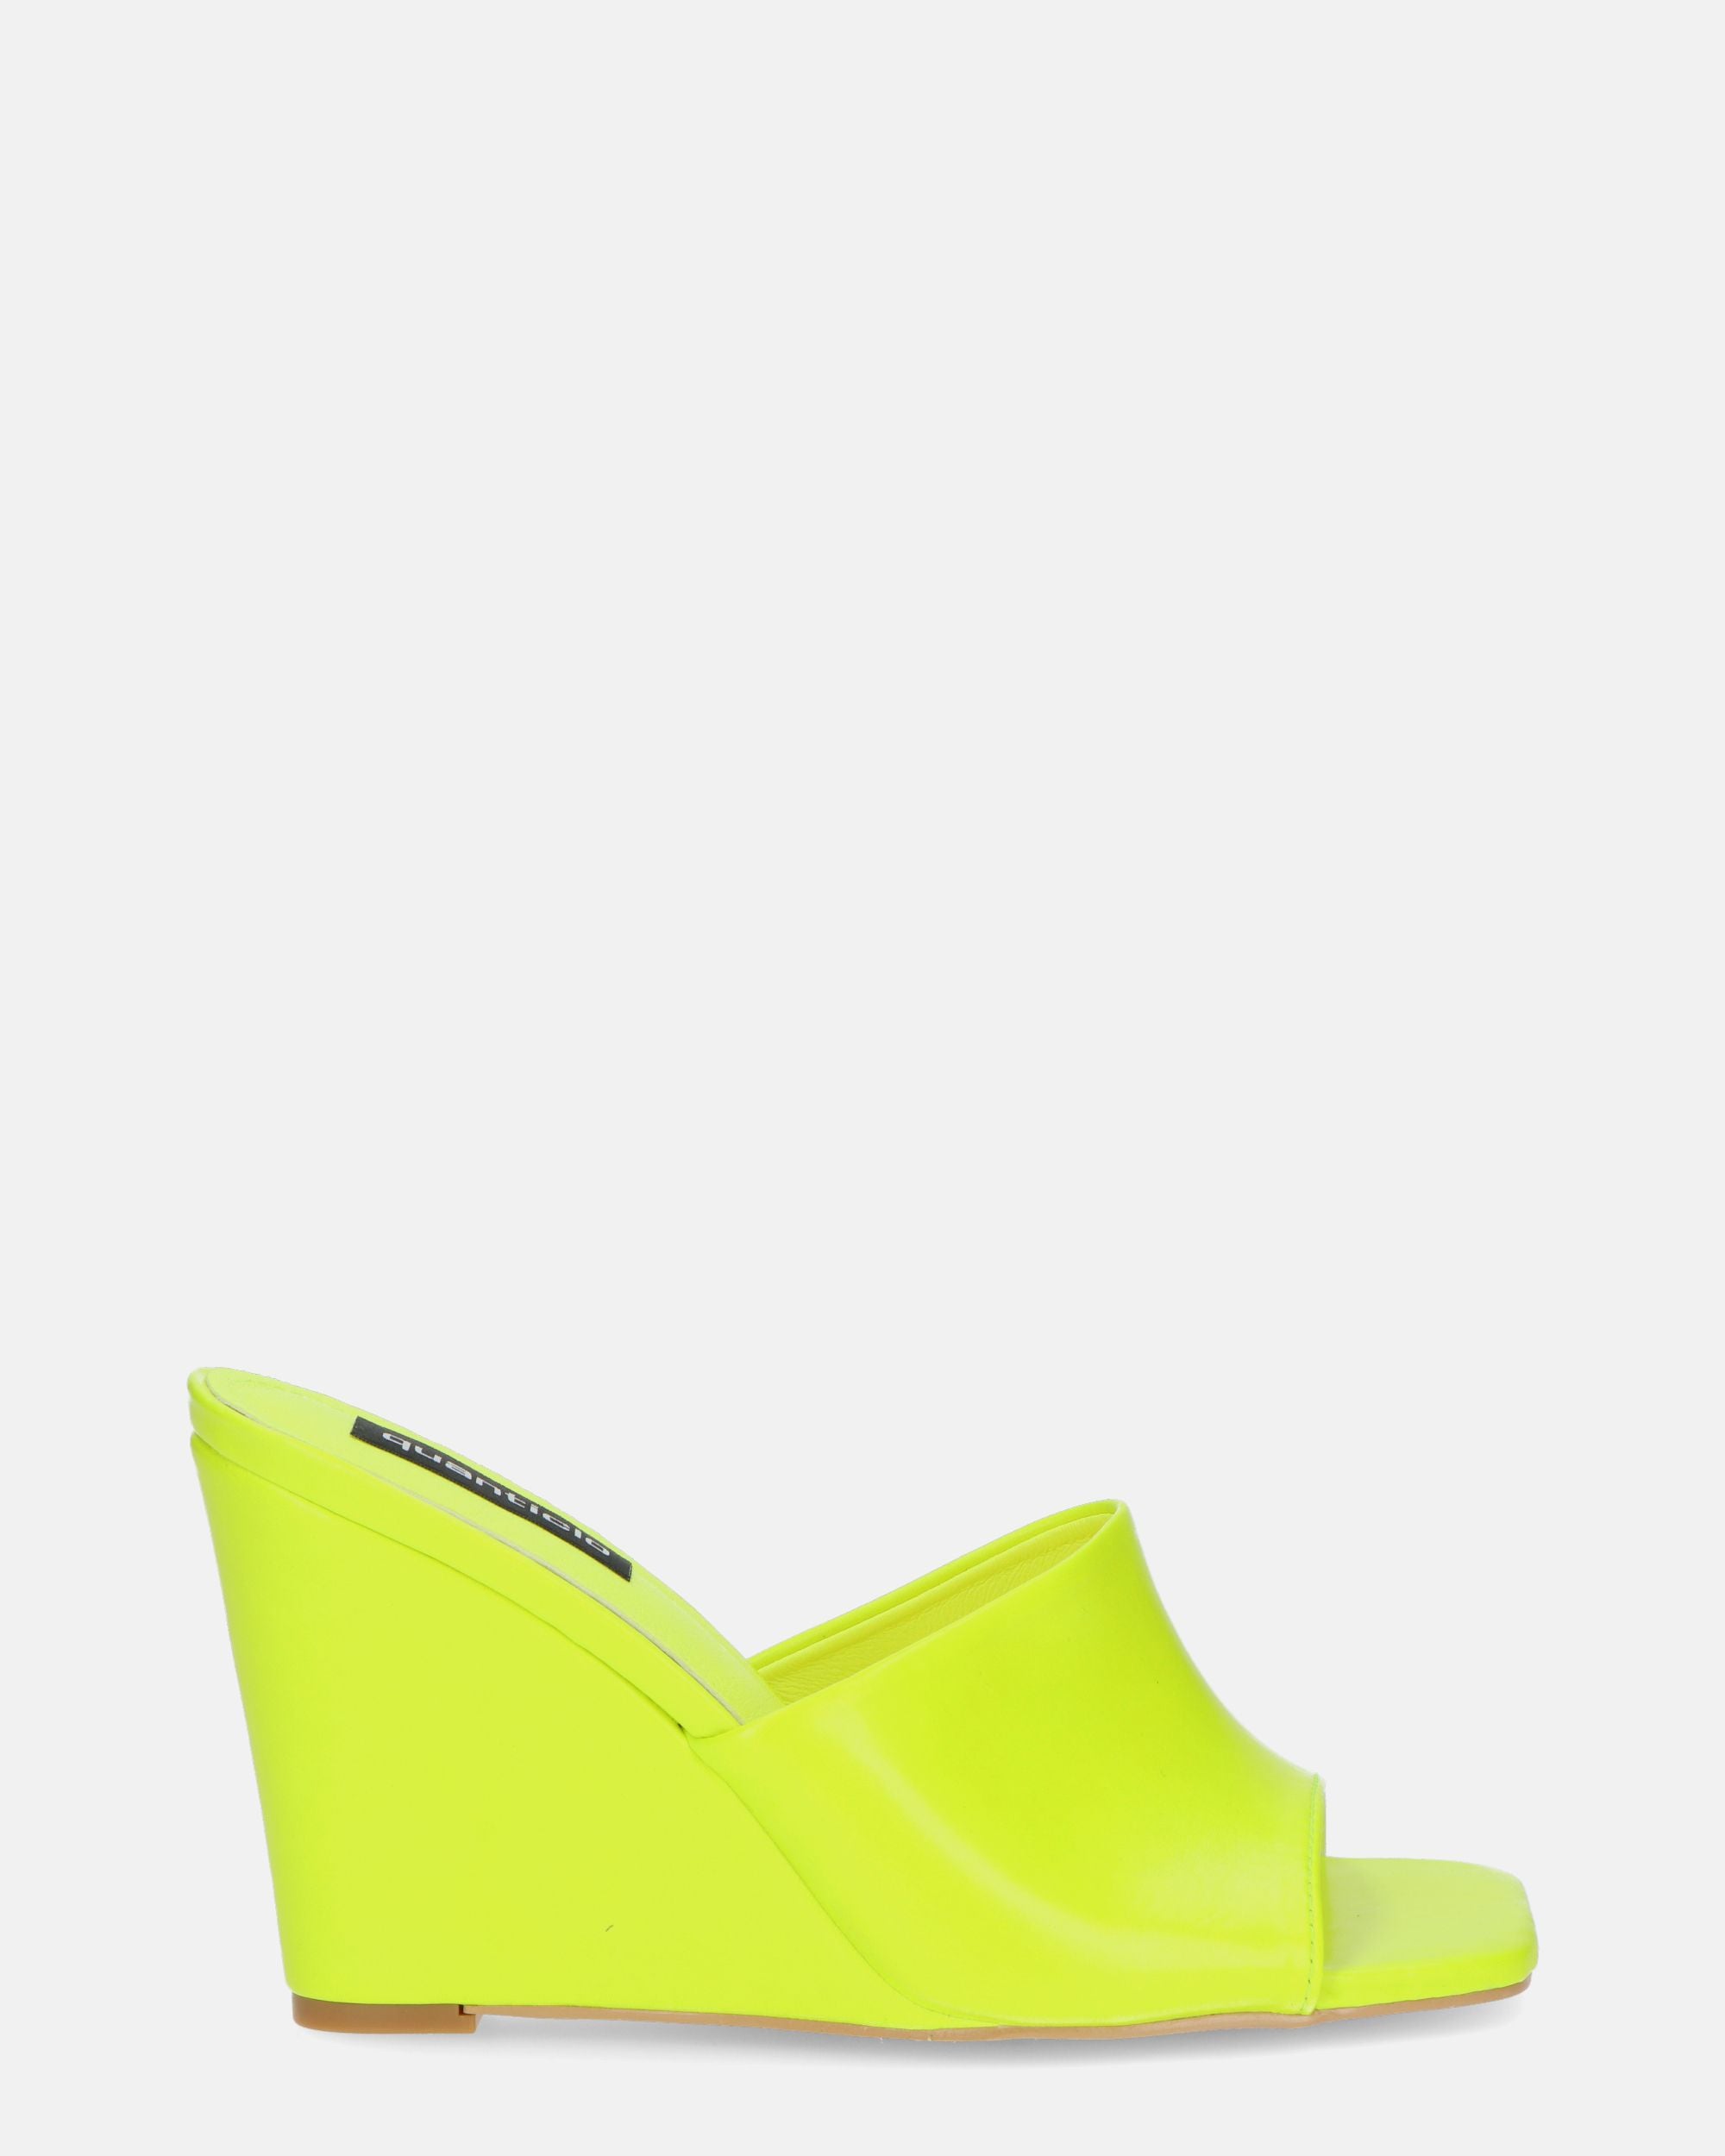 MARGHERITA - wedge sandals in fluo yellow PU